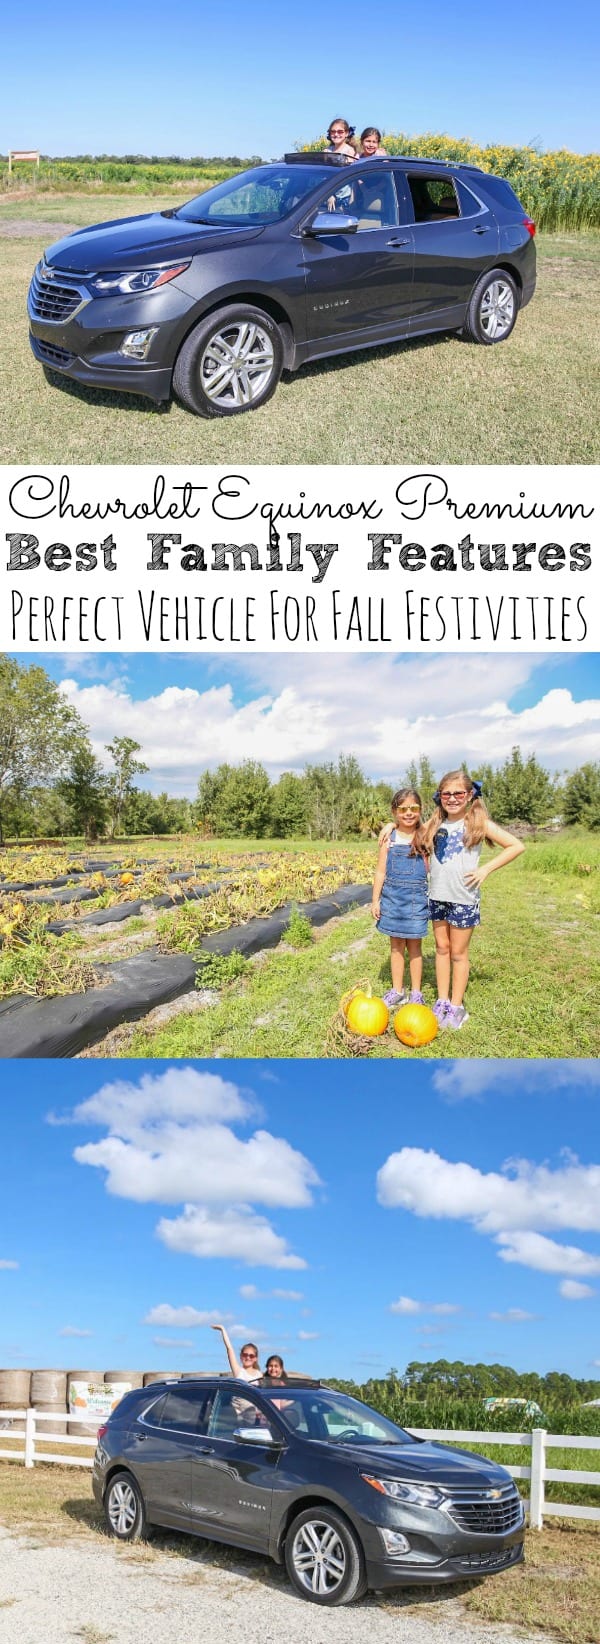 Chevrolet Equinox Family Features | Perfect Vehicle For Fall Festivities